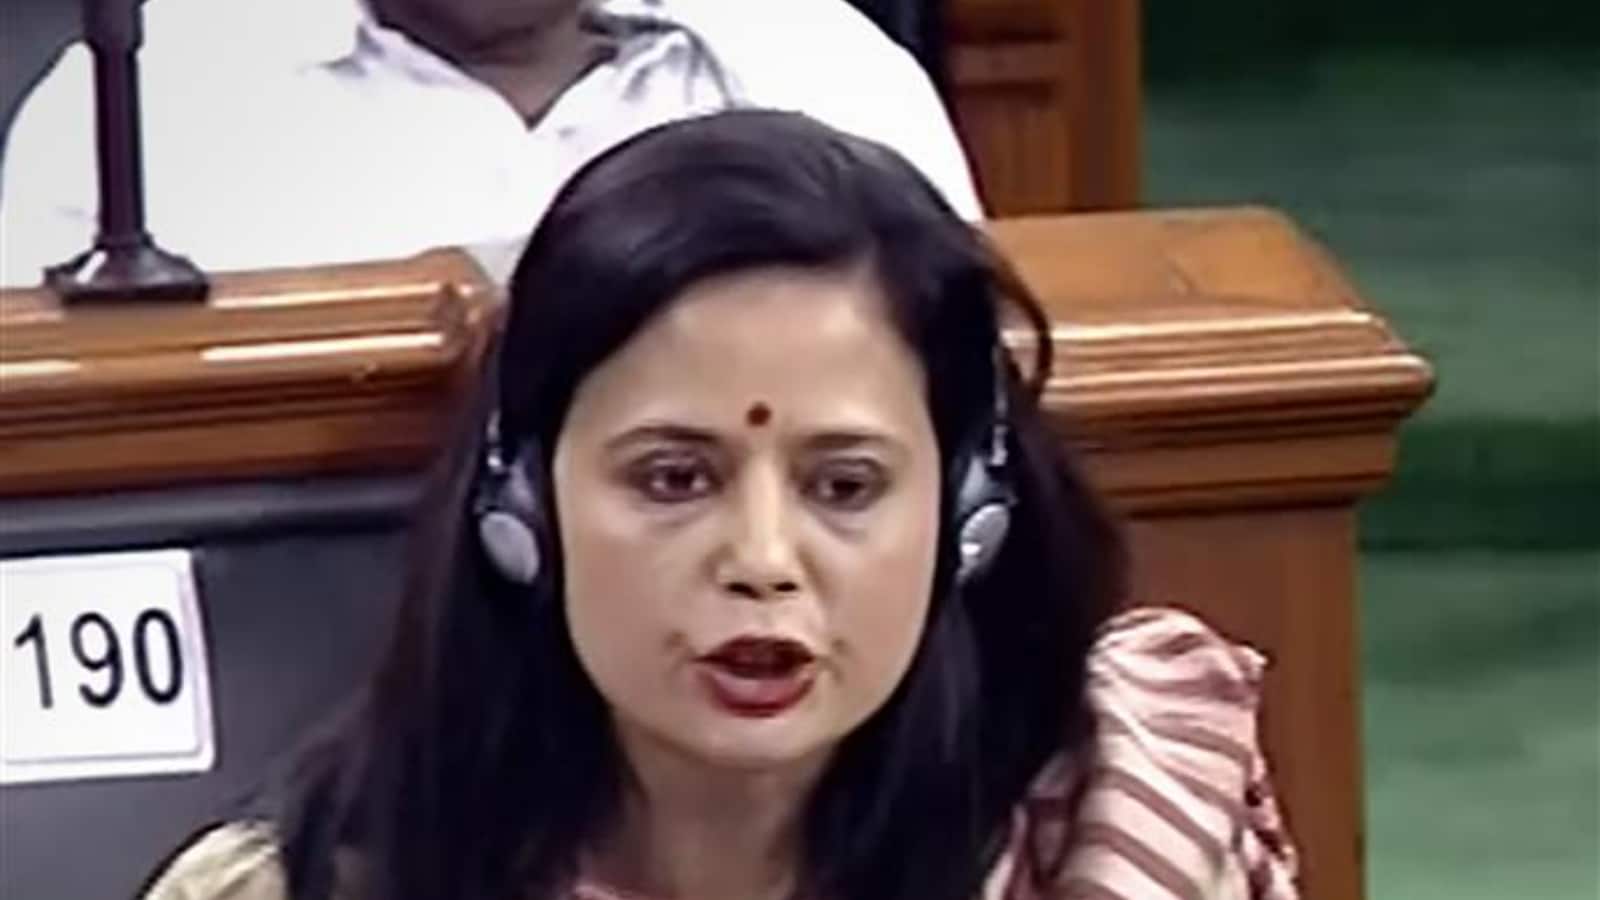 BJP MPs Heckled Sonia Gandhi "Pack-Wolf Style": Trinamool's Mahua  Moitra